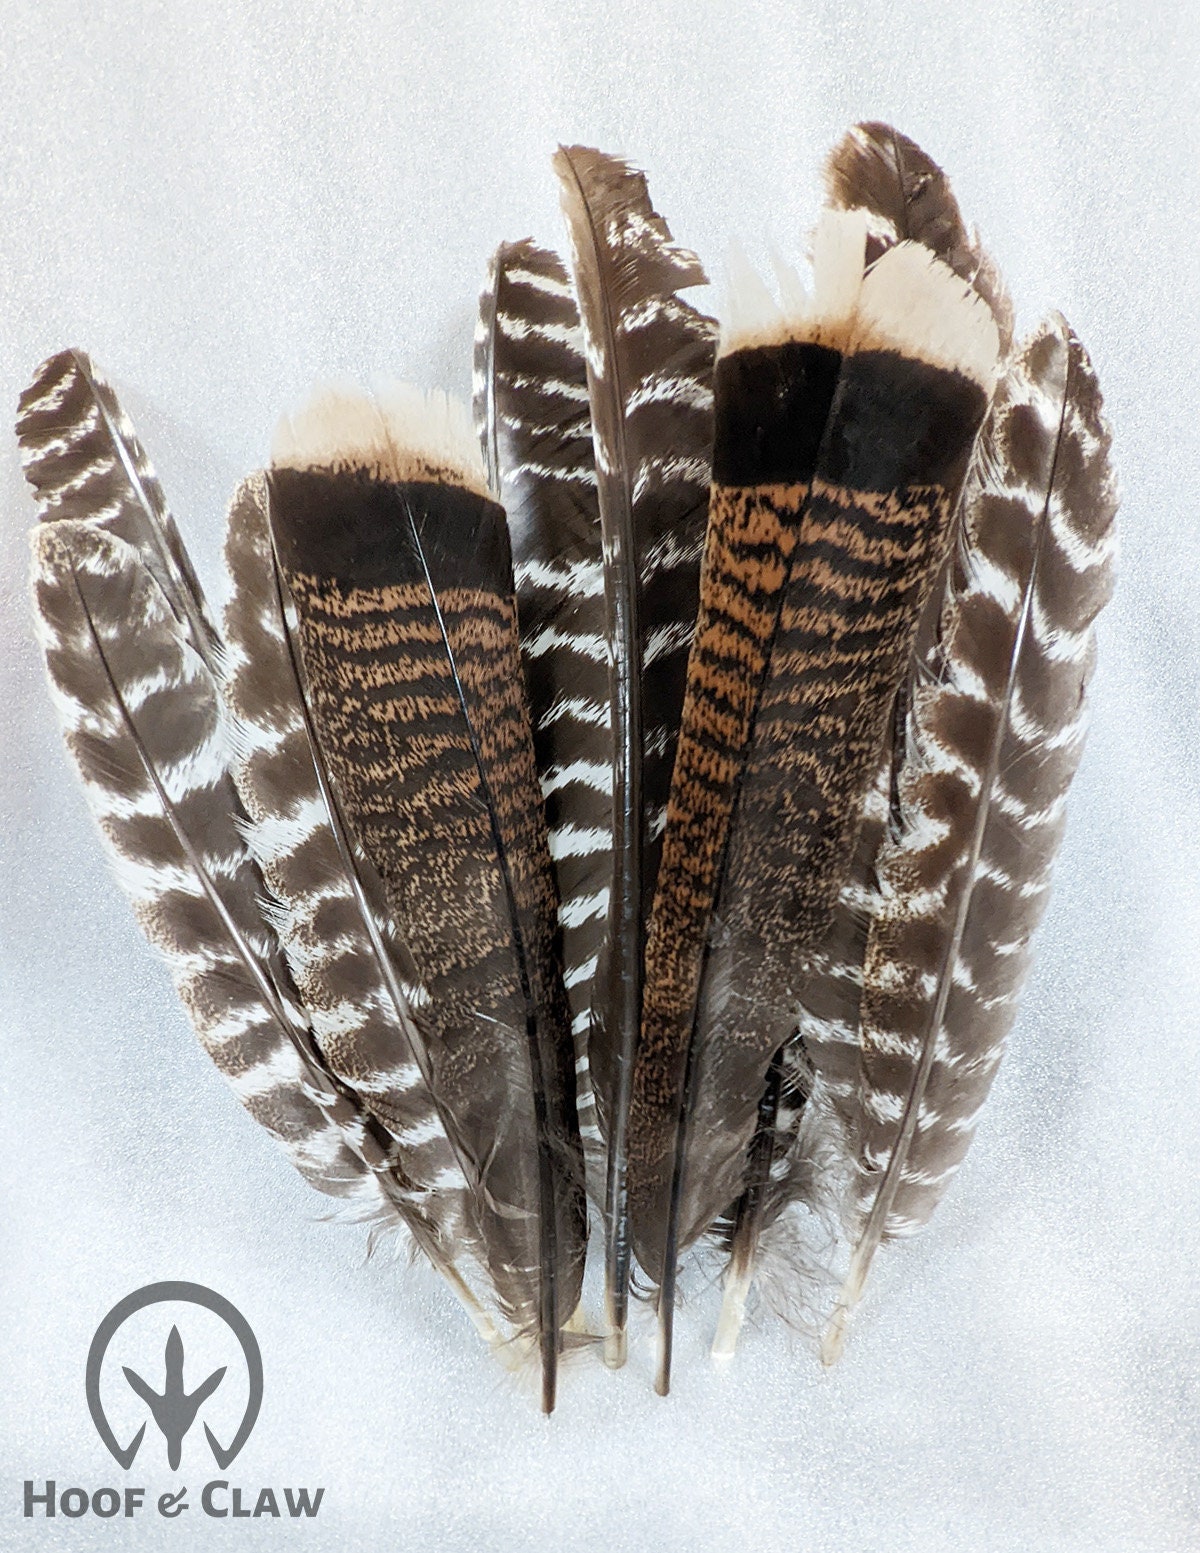 10 Pieces - 6-8 Natural Reeves Venery Pheasant Tail Feathers